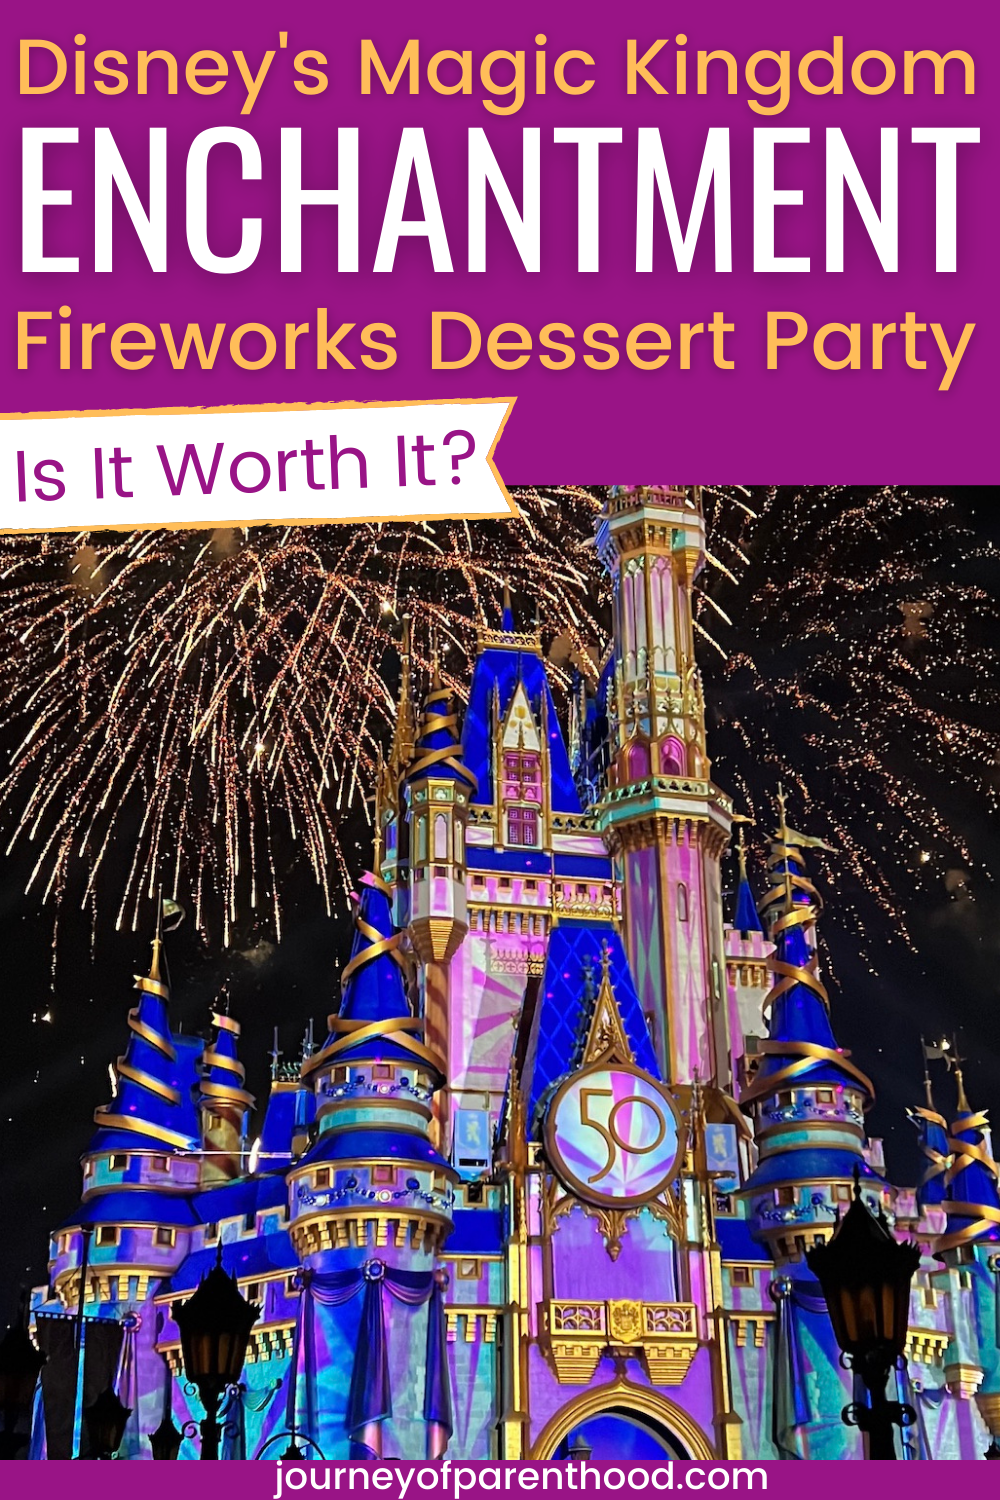 Disney Enchantment Treats and Seats - Disney Fireworks Dessert Party Review. Is the fireworks party at Magic Kingdom worth it? What to expect during the fireworks dessert party at Disney World - food, drinks, fireworks viewing area and more from a Disney mom! 